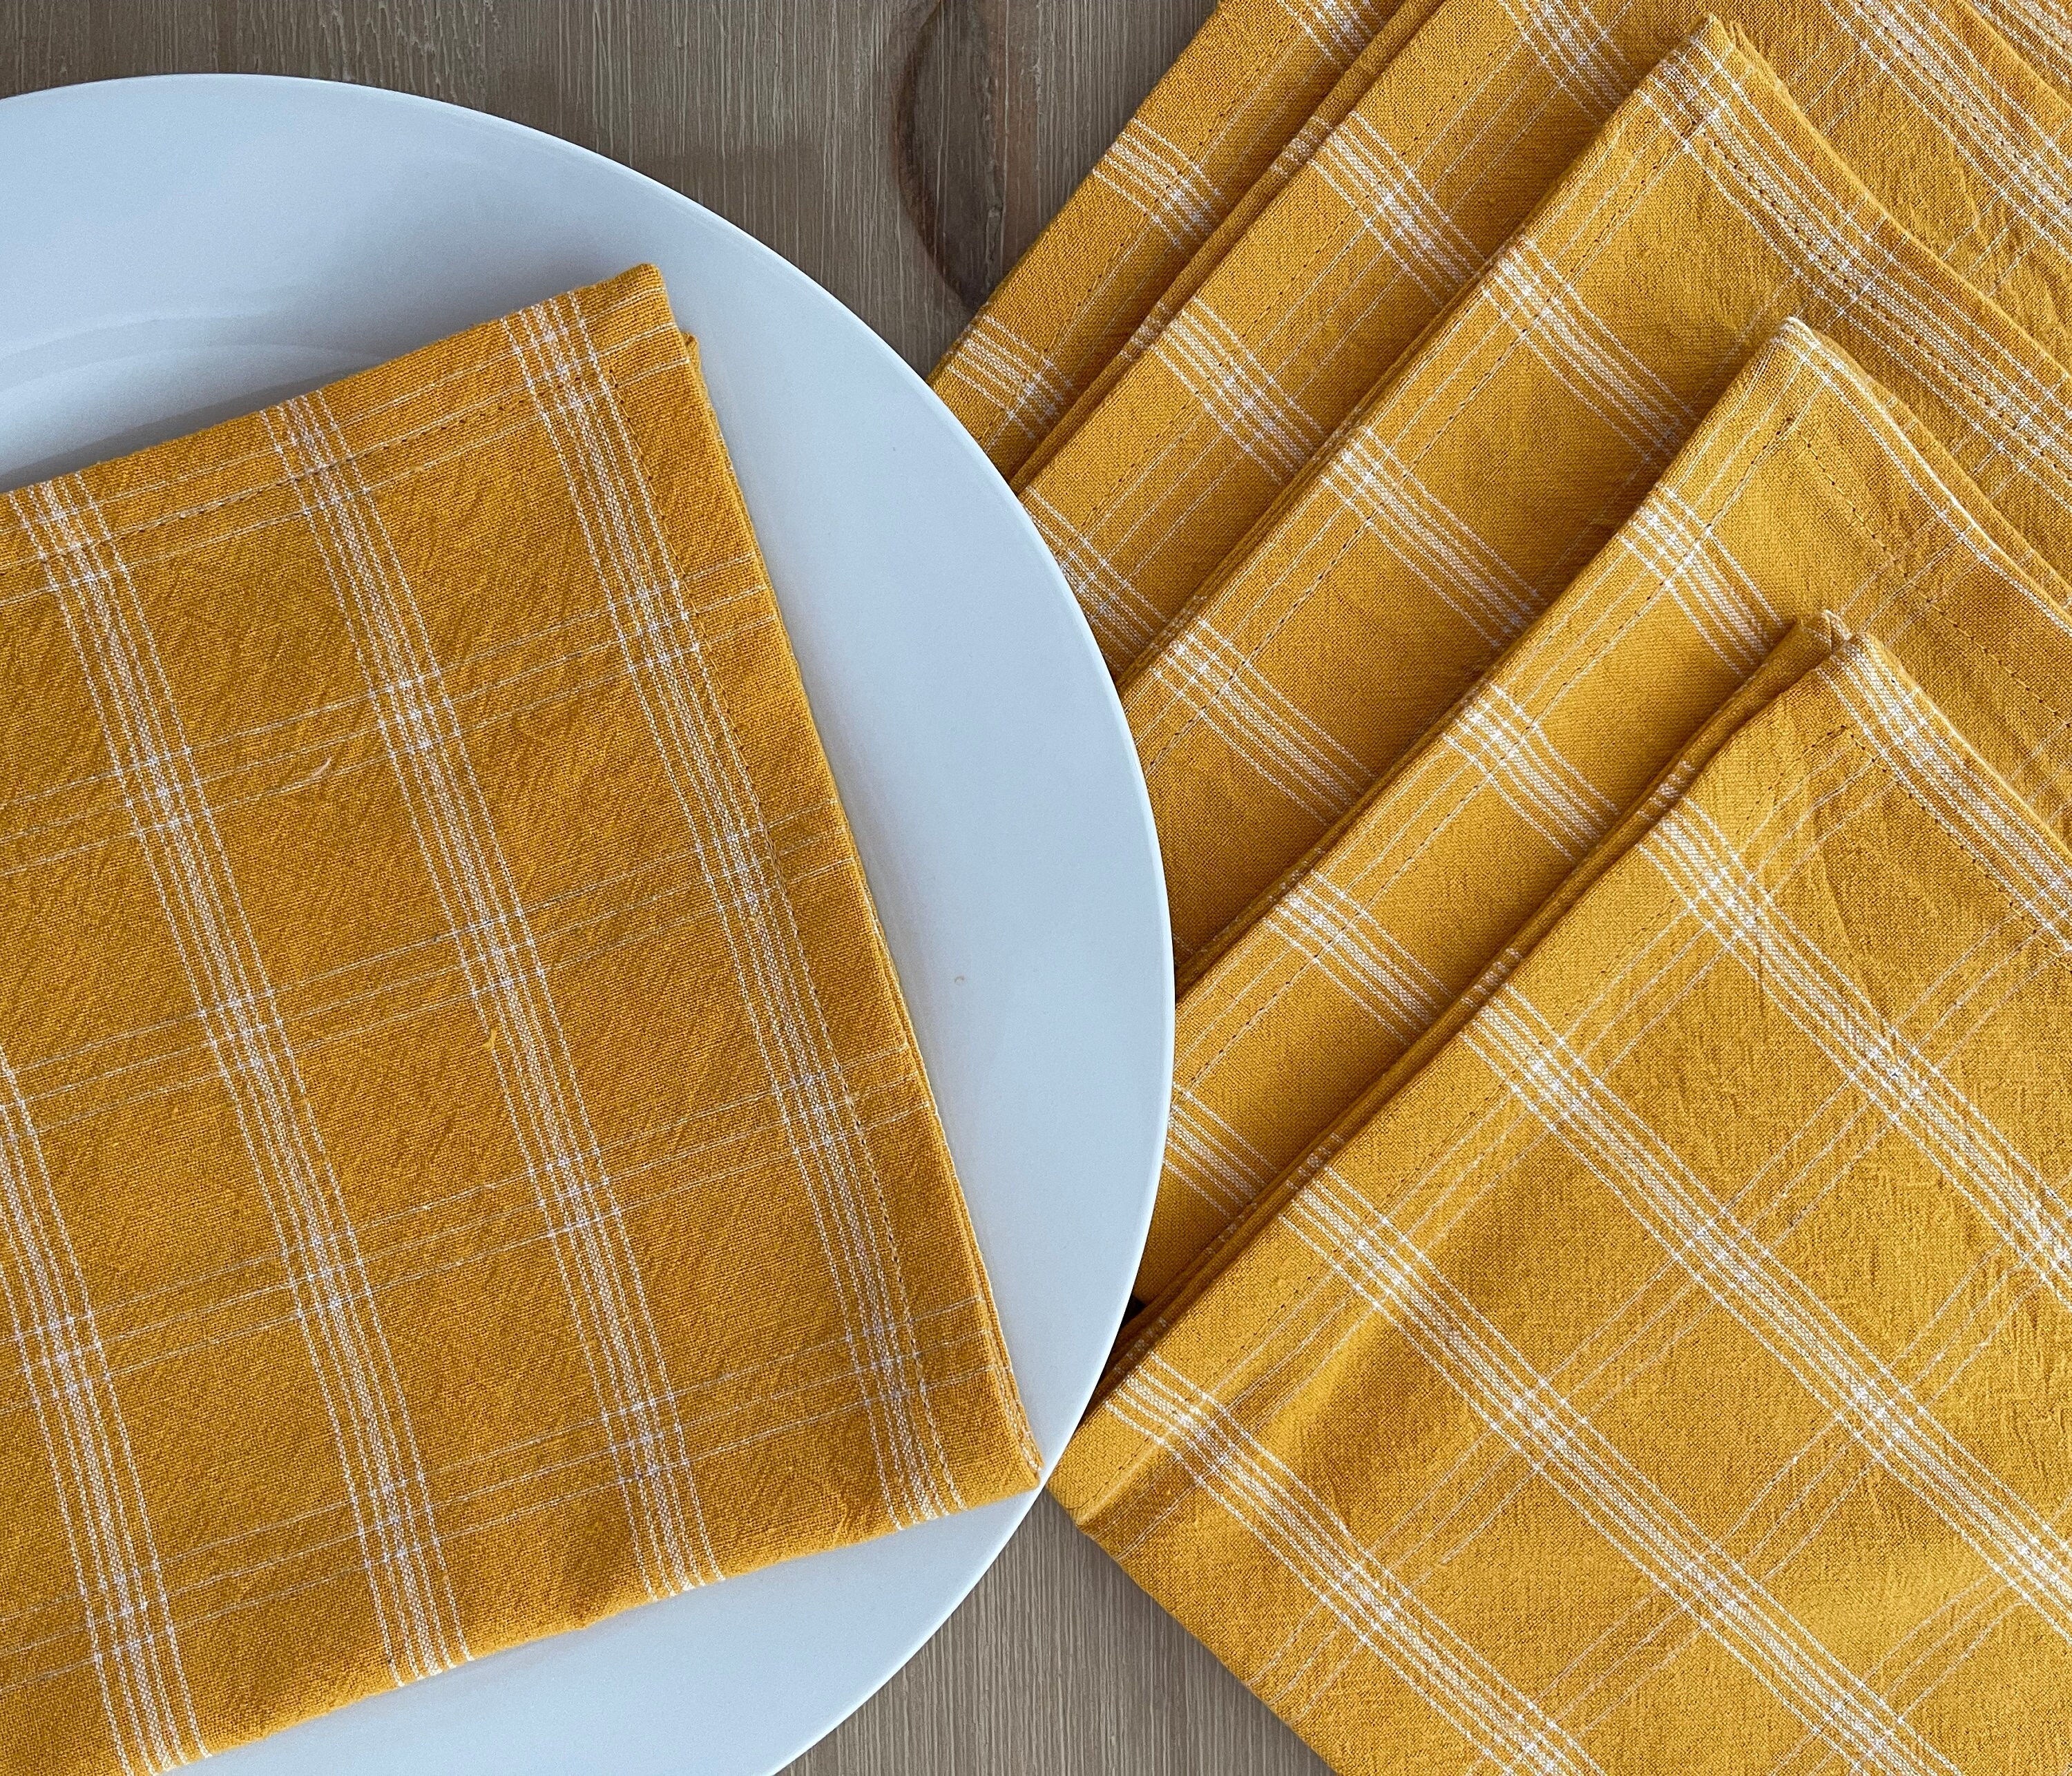 Getfitsoo Fall Cloth Napkins Set of 6, 100% Cotton Napkins with Fringe, 18 x 18 Inches Soft Handmade Dinner Napkins Cloth Washable for Thanksgiving